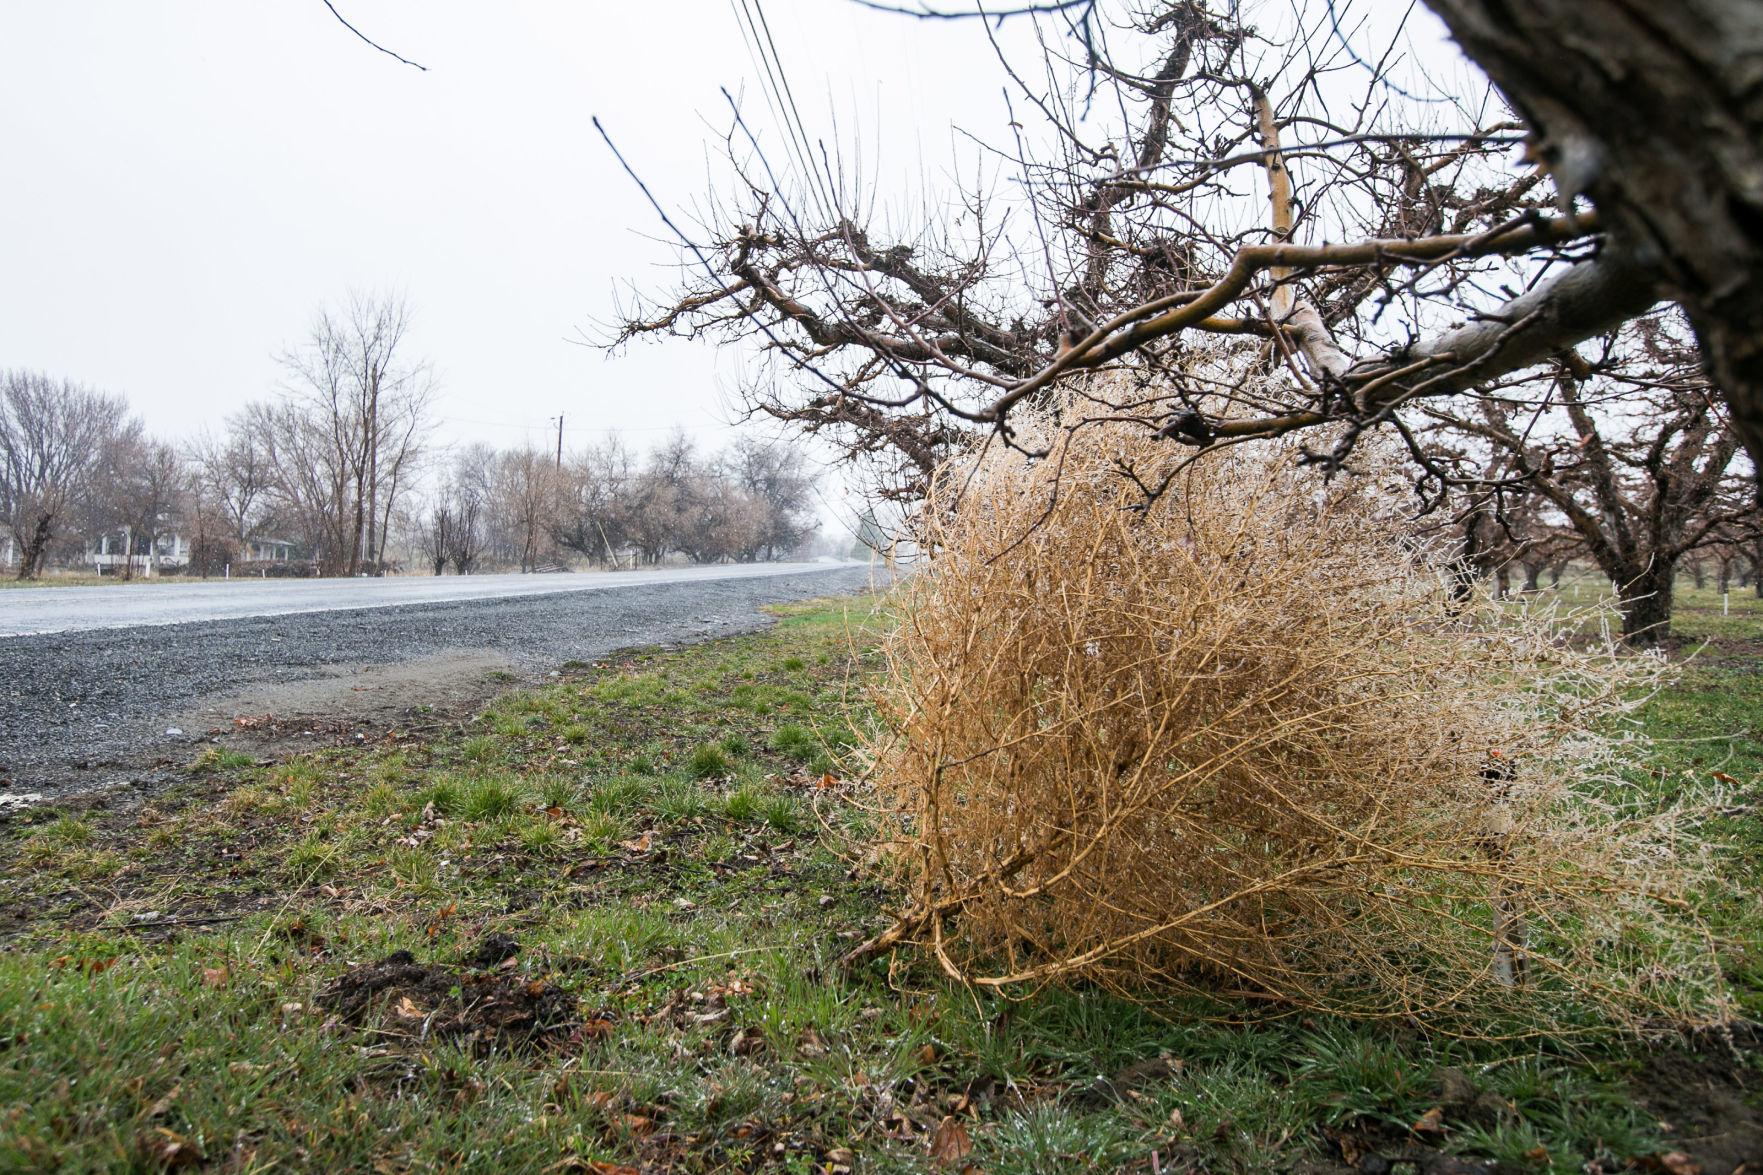 Giant tumbleweed an invasive species that's here to stay – from UC  Riverside – CDFA's Planting Seeds BlogCDFA's Planting Seeds Blog